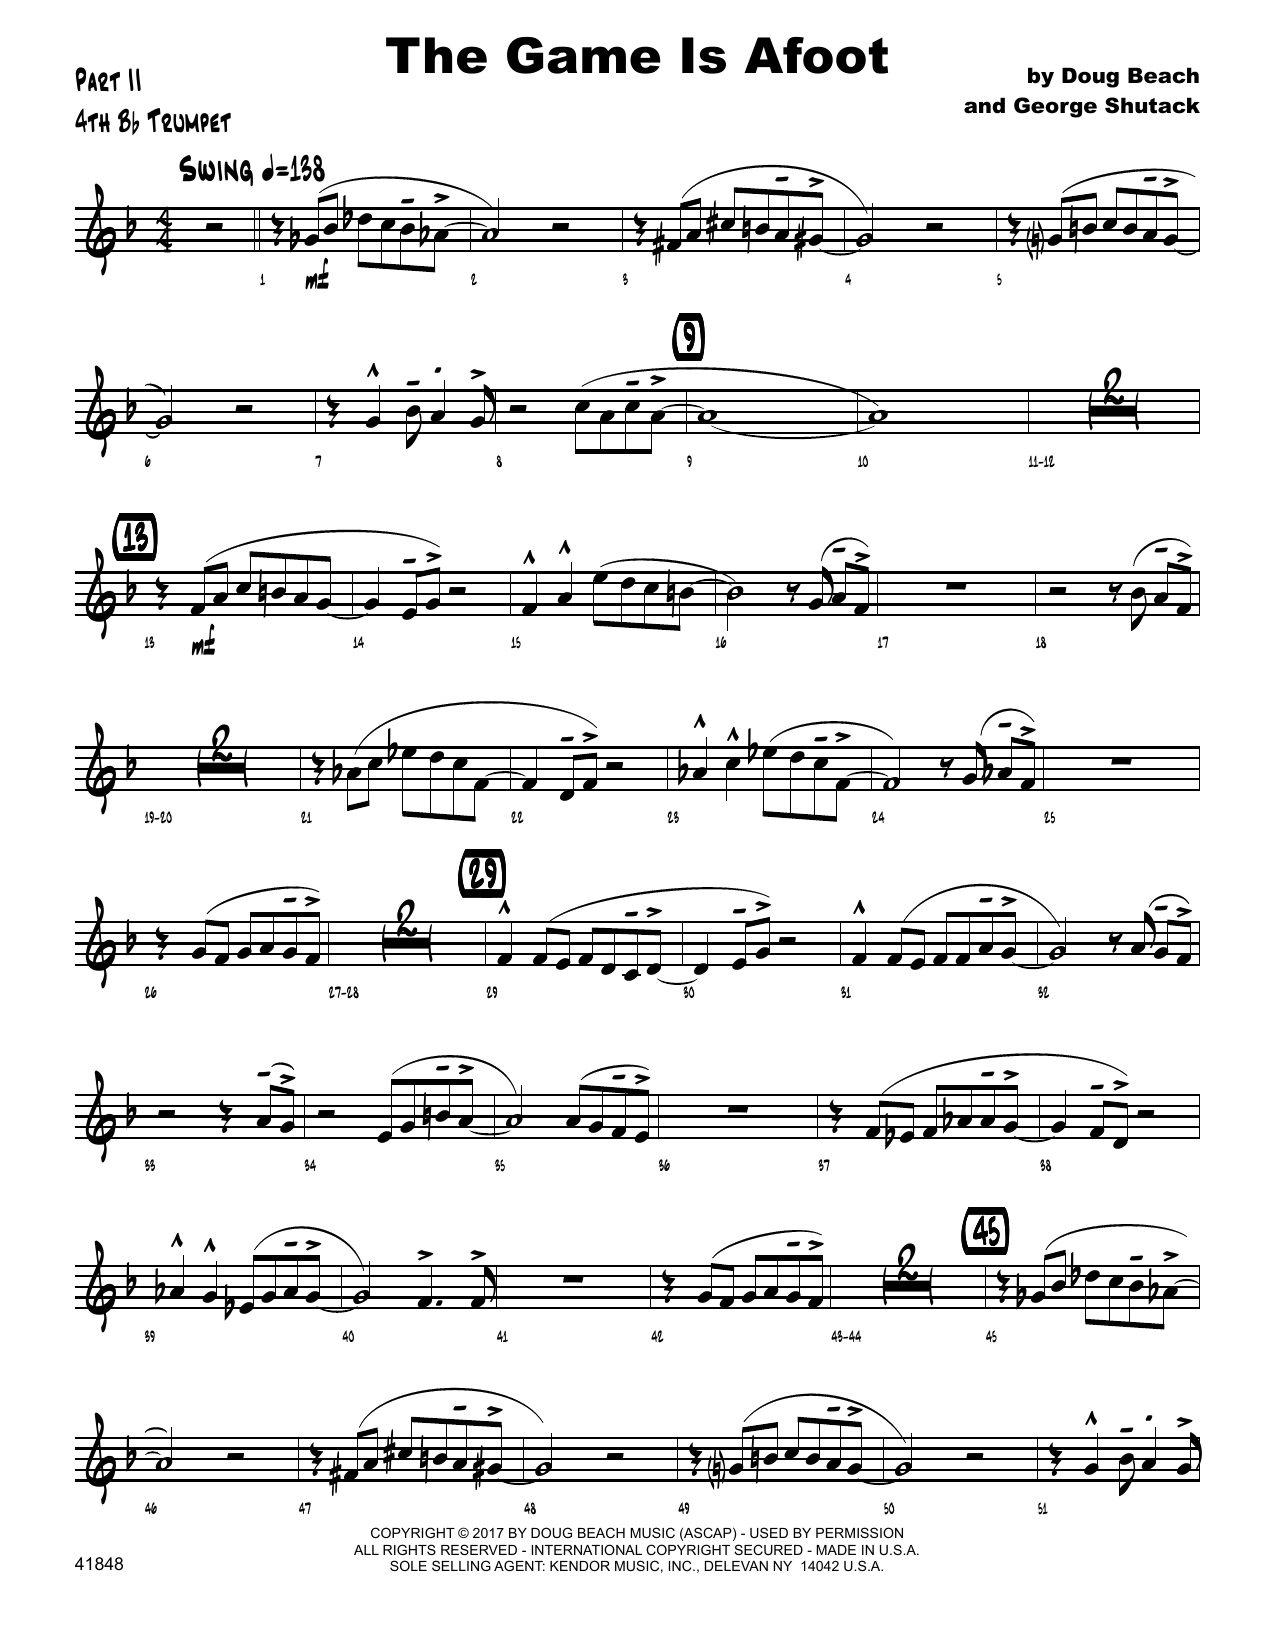 Download Doug Beach & George Shutack The Game Is Afoot - 4th Bb Trumpet Sheet Music